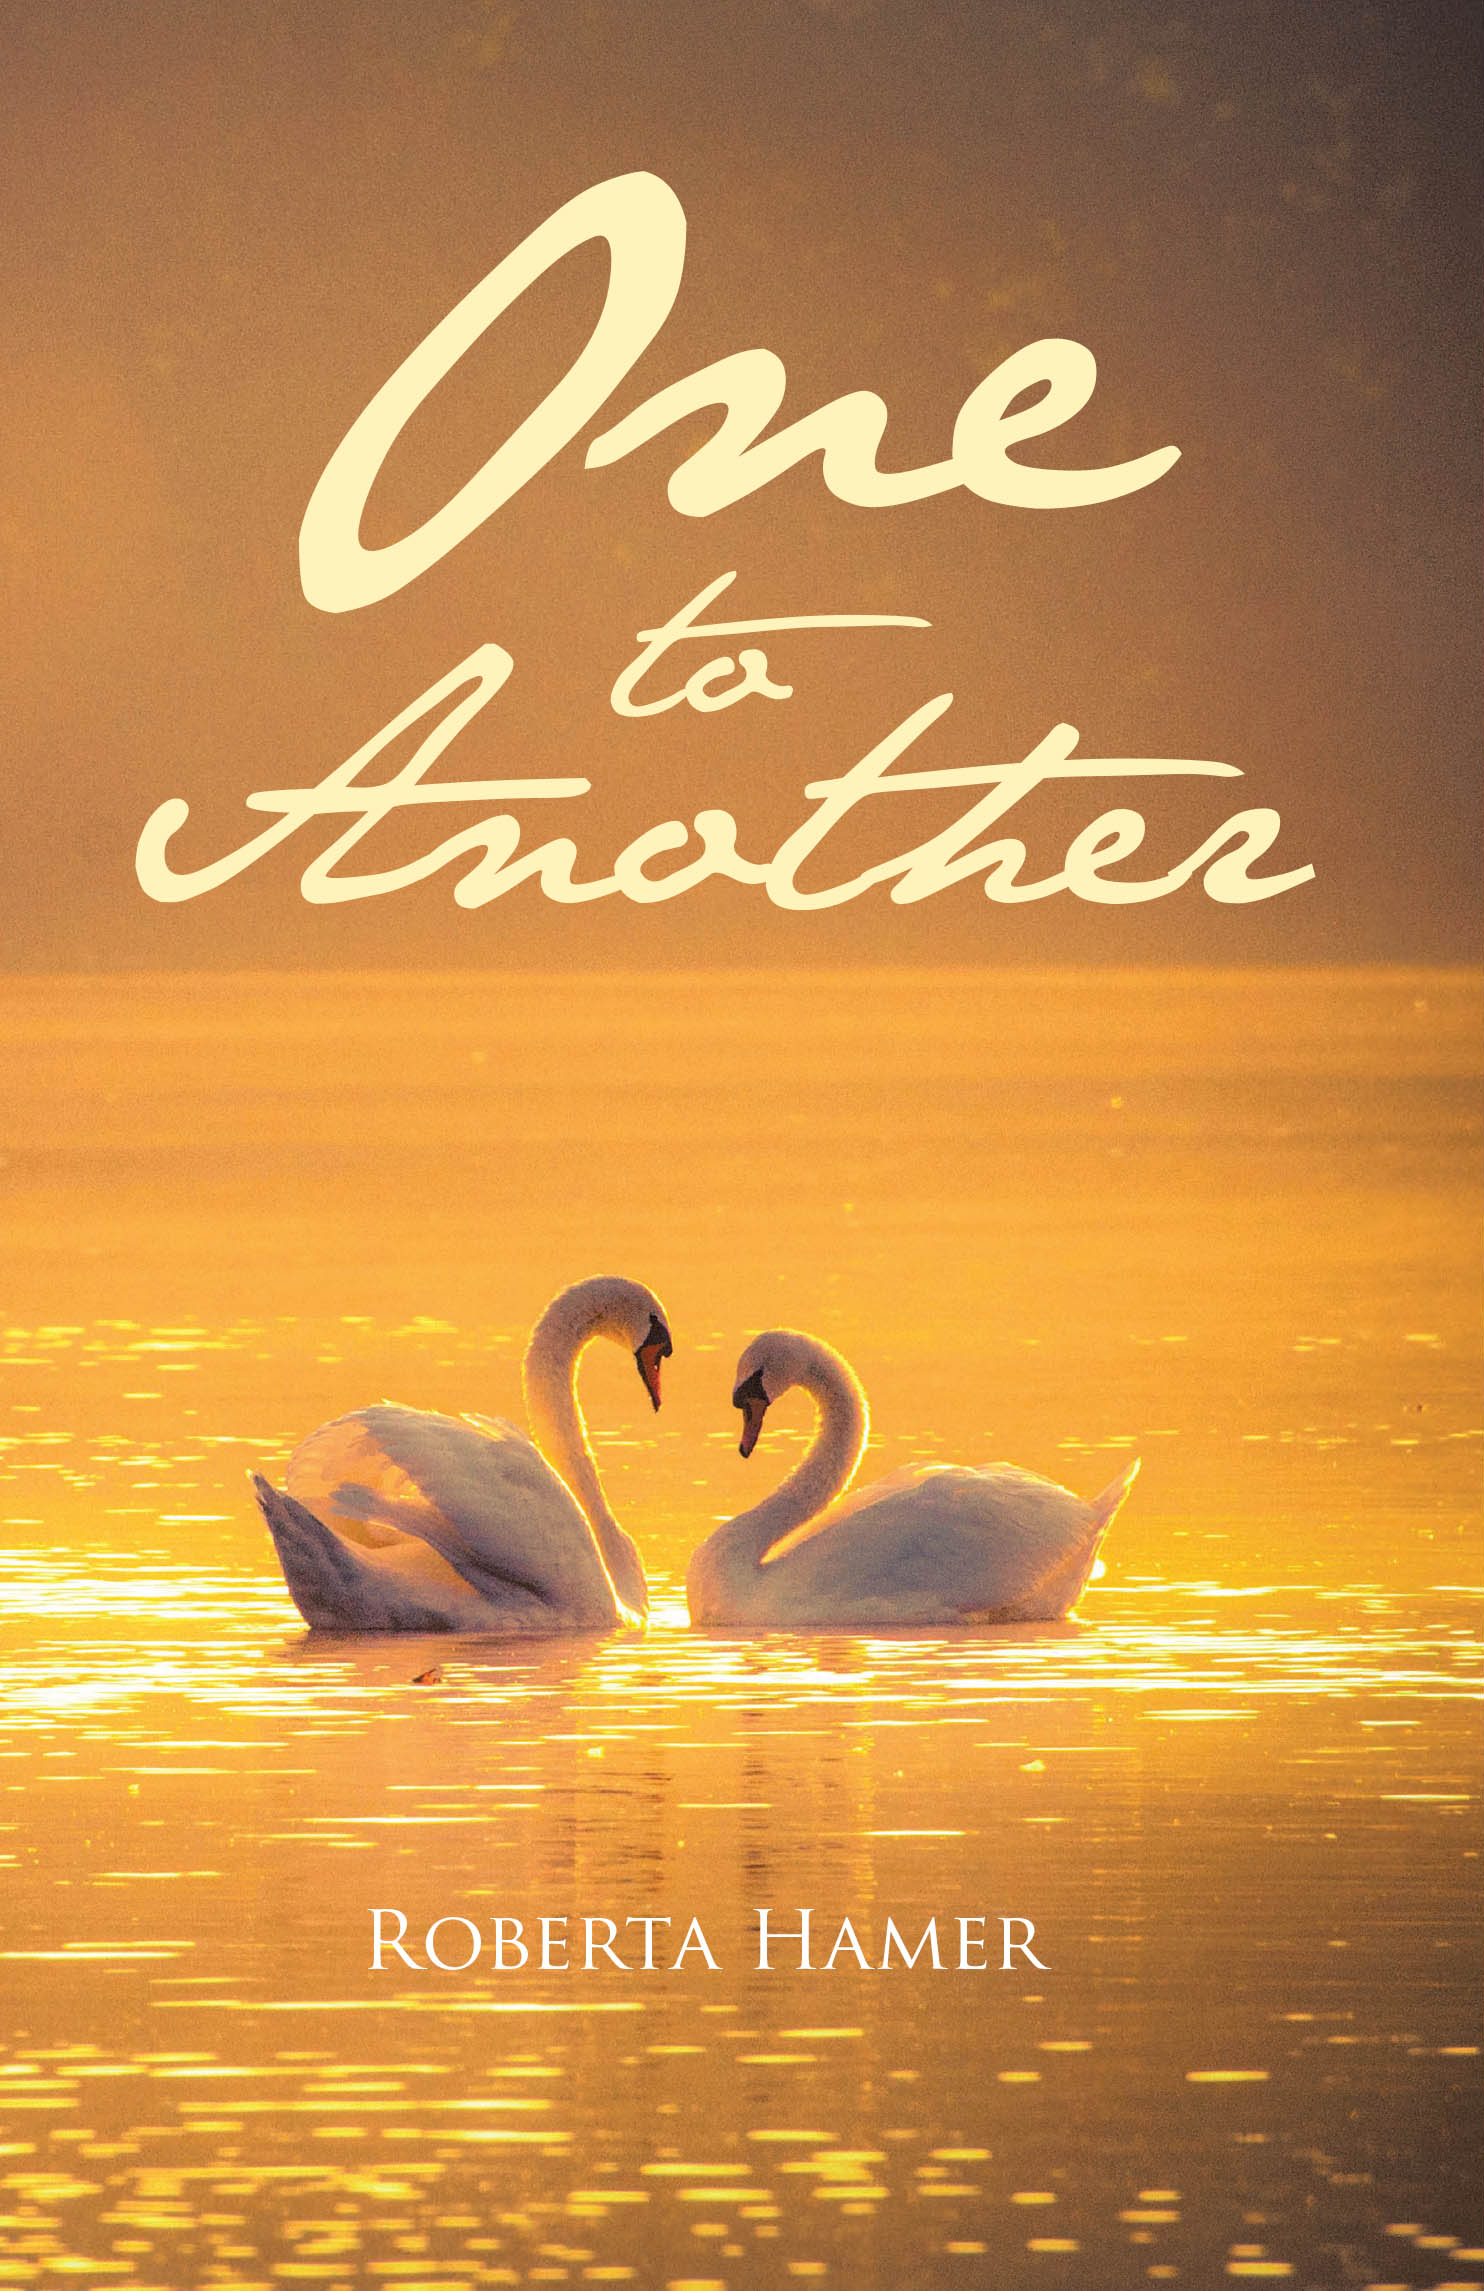 Roberta Hamer’s Newly Released "One to Another" is a Powerful and Inspirational Memoir